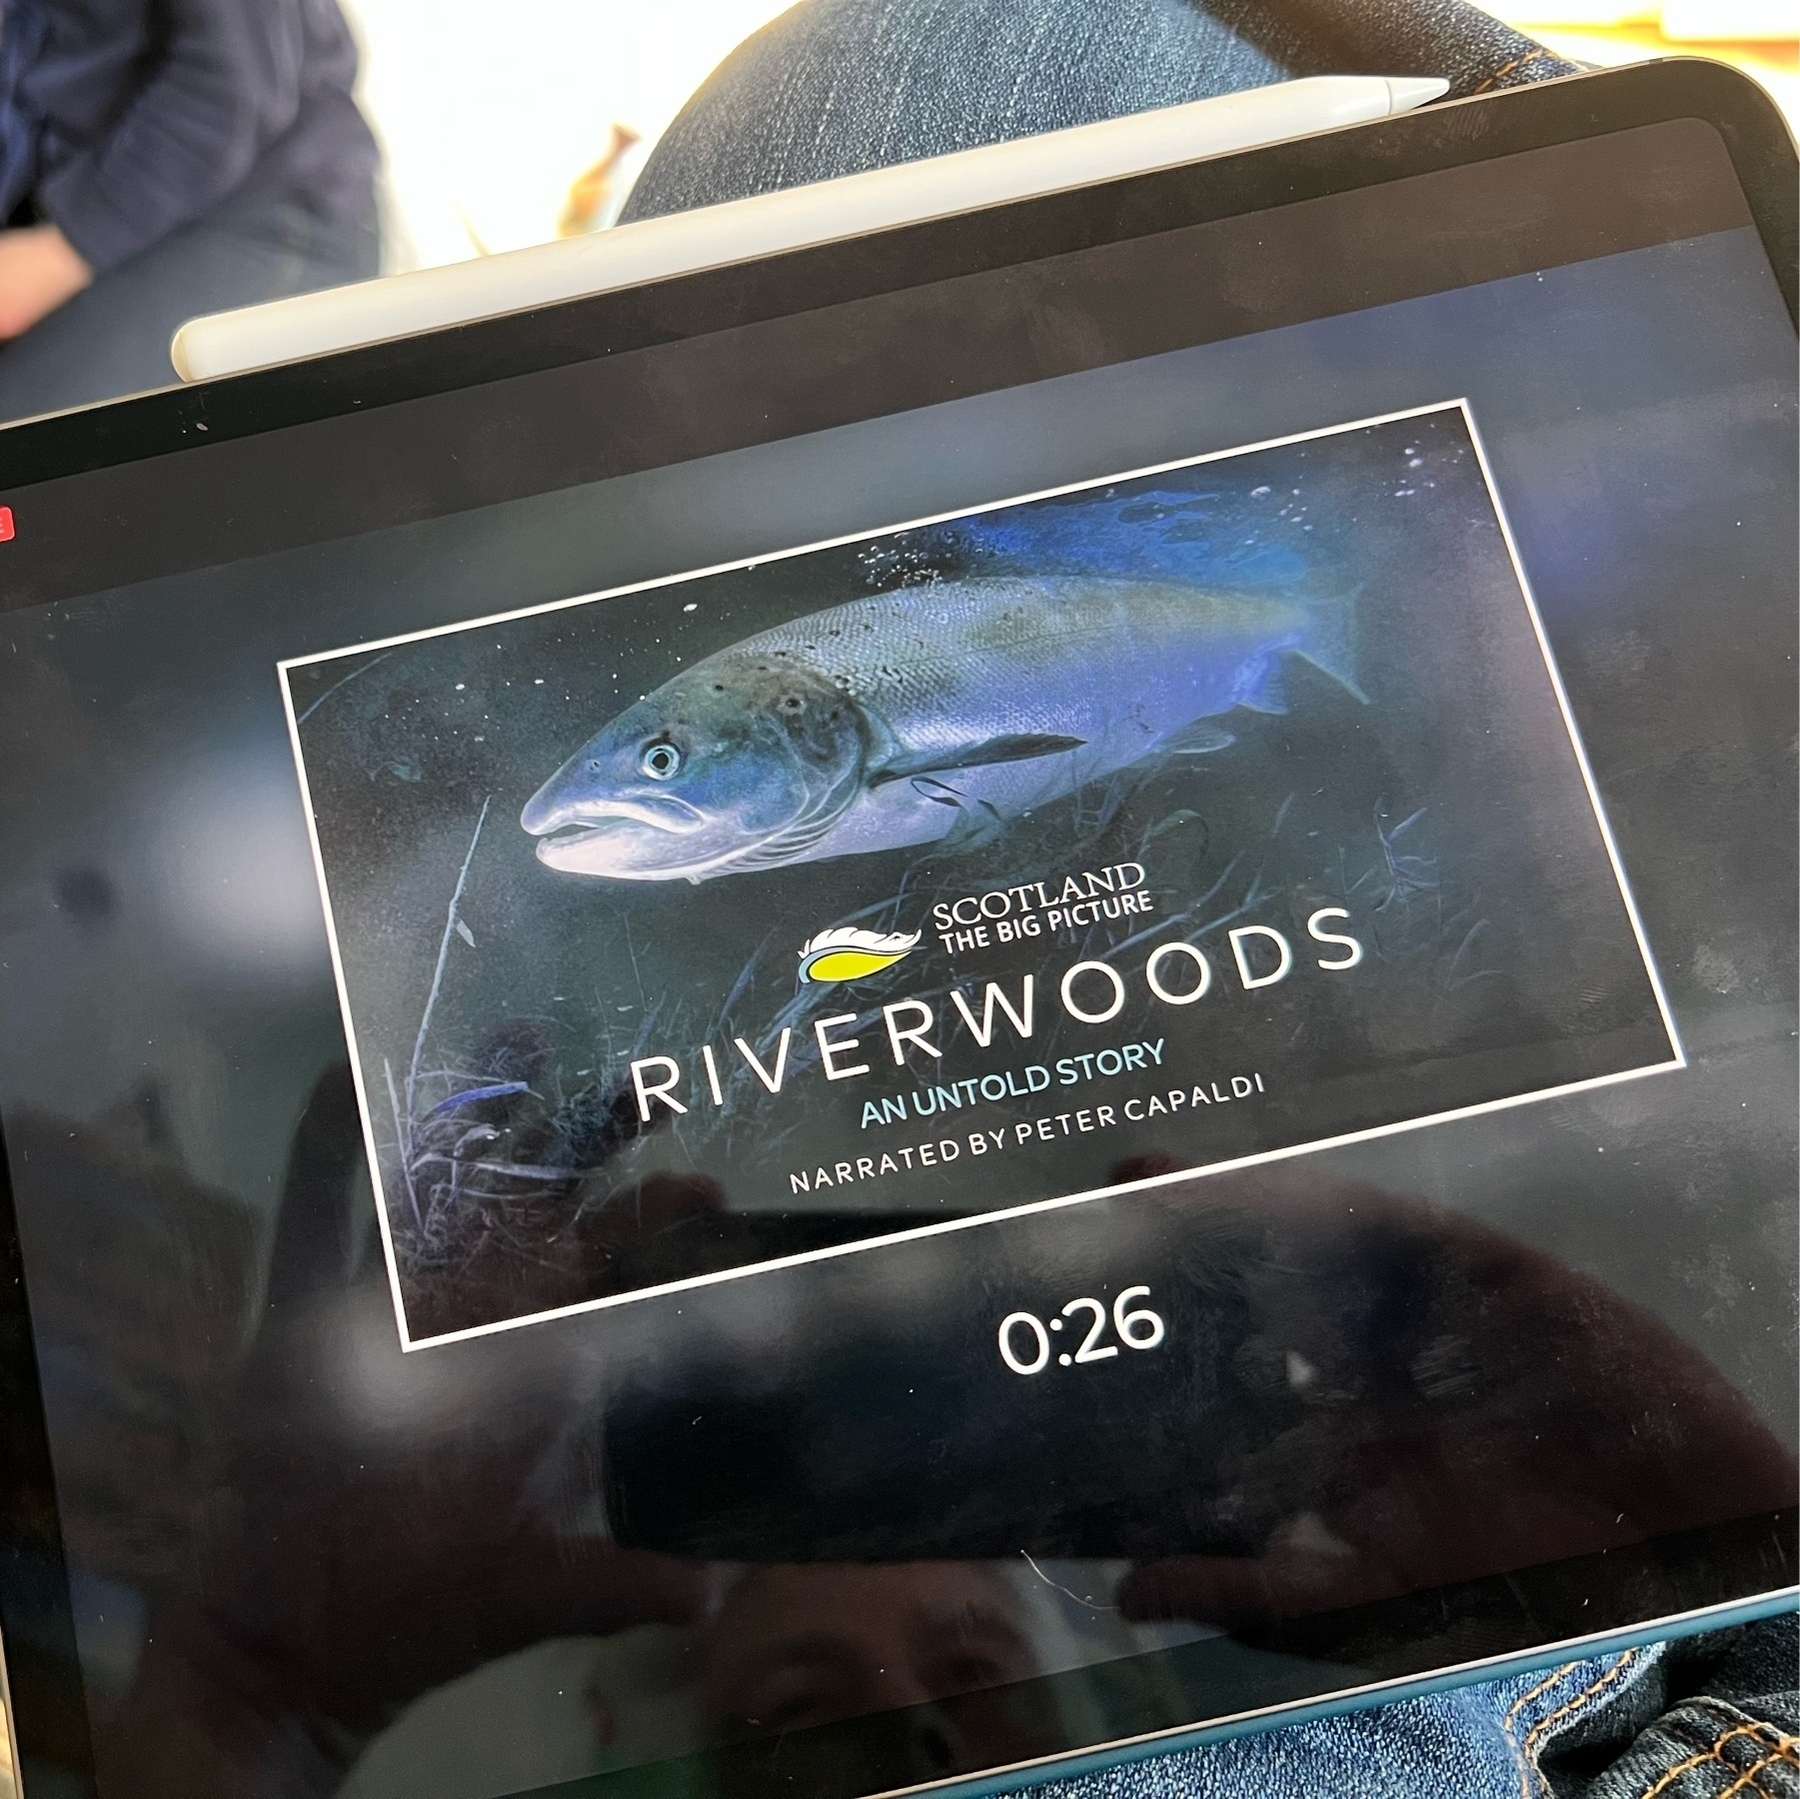 An iPad showing the livestream of Riverwoods. 